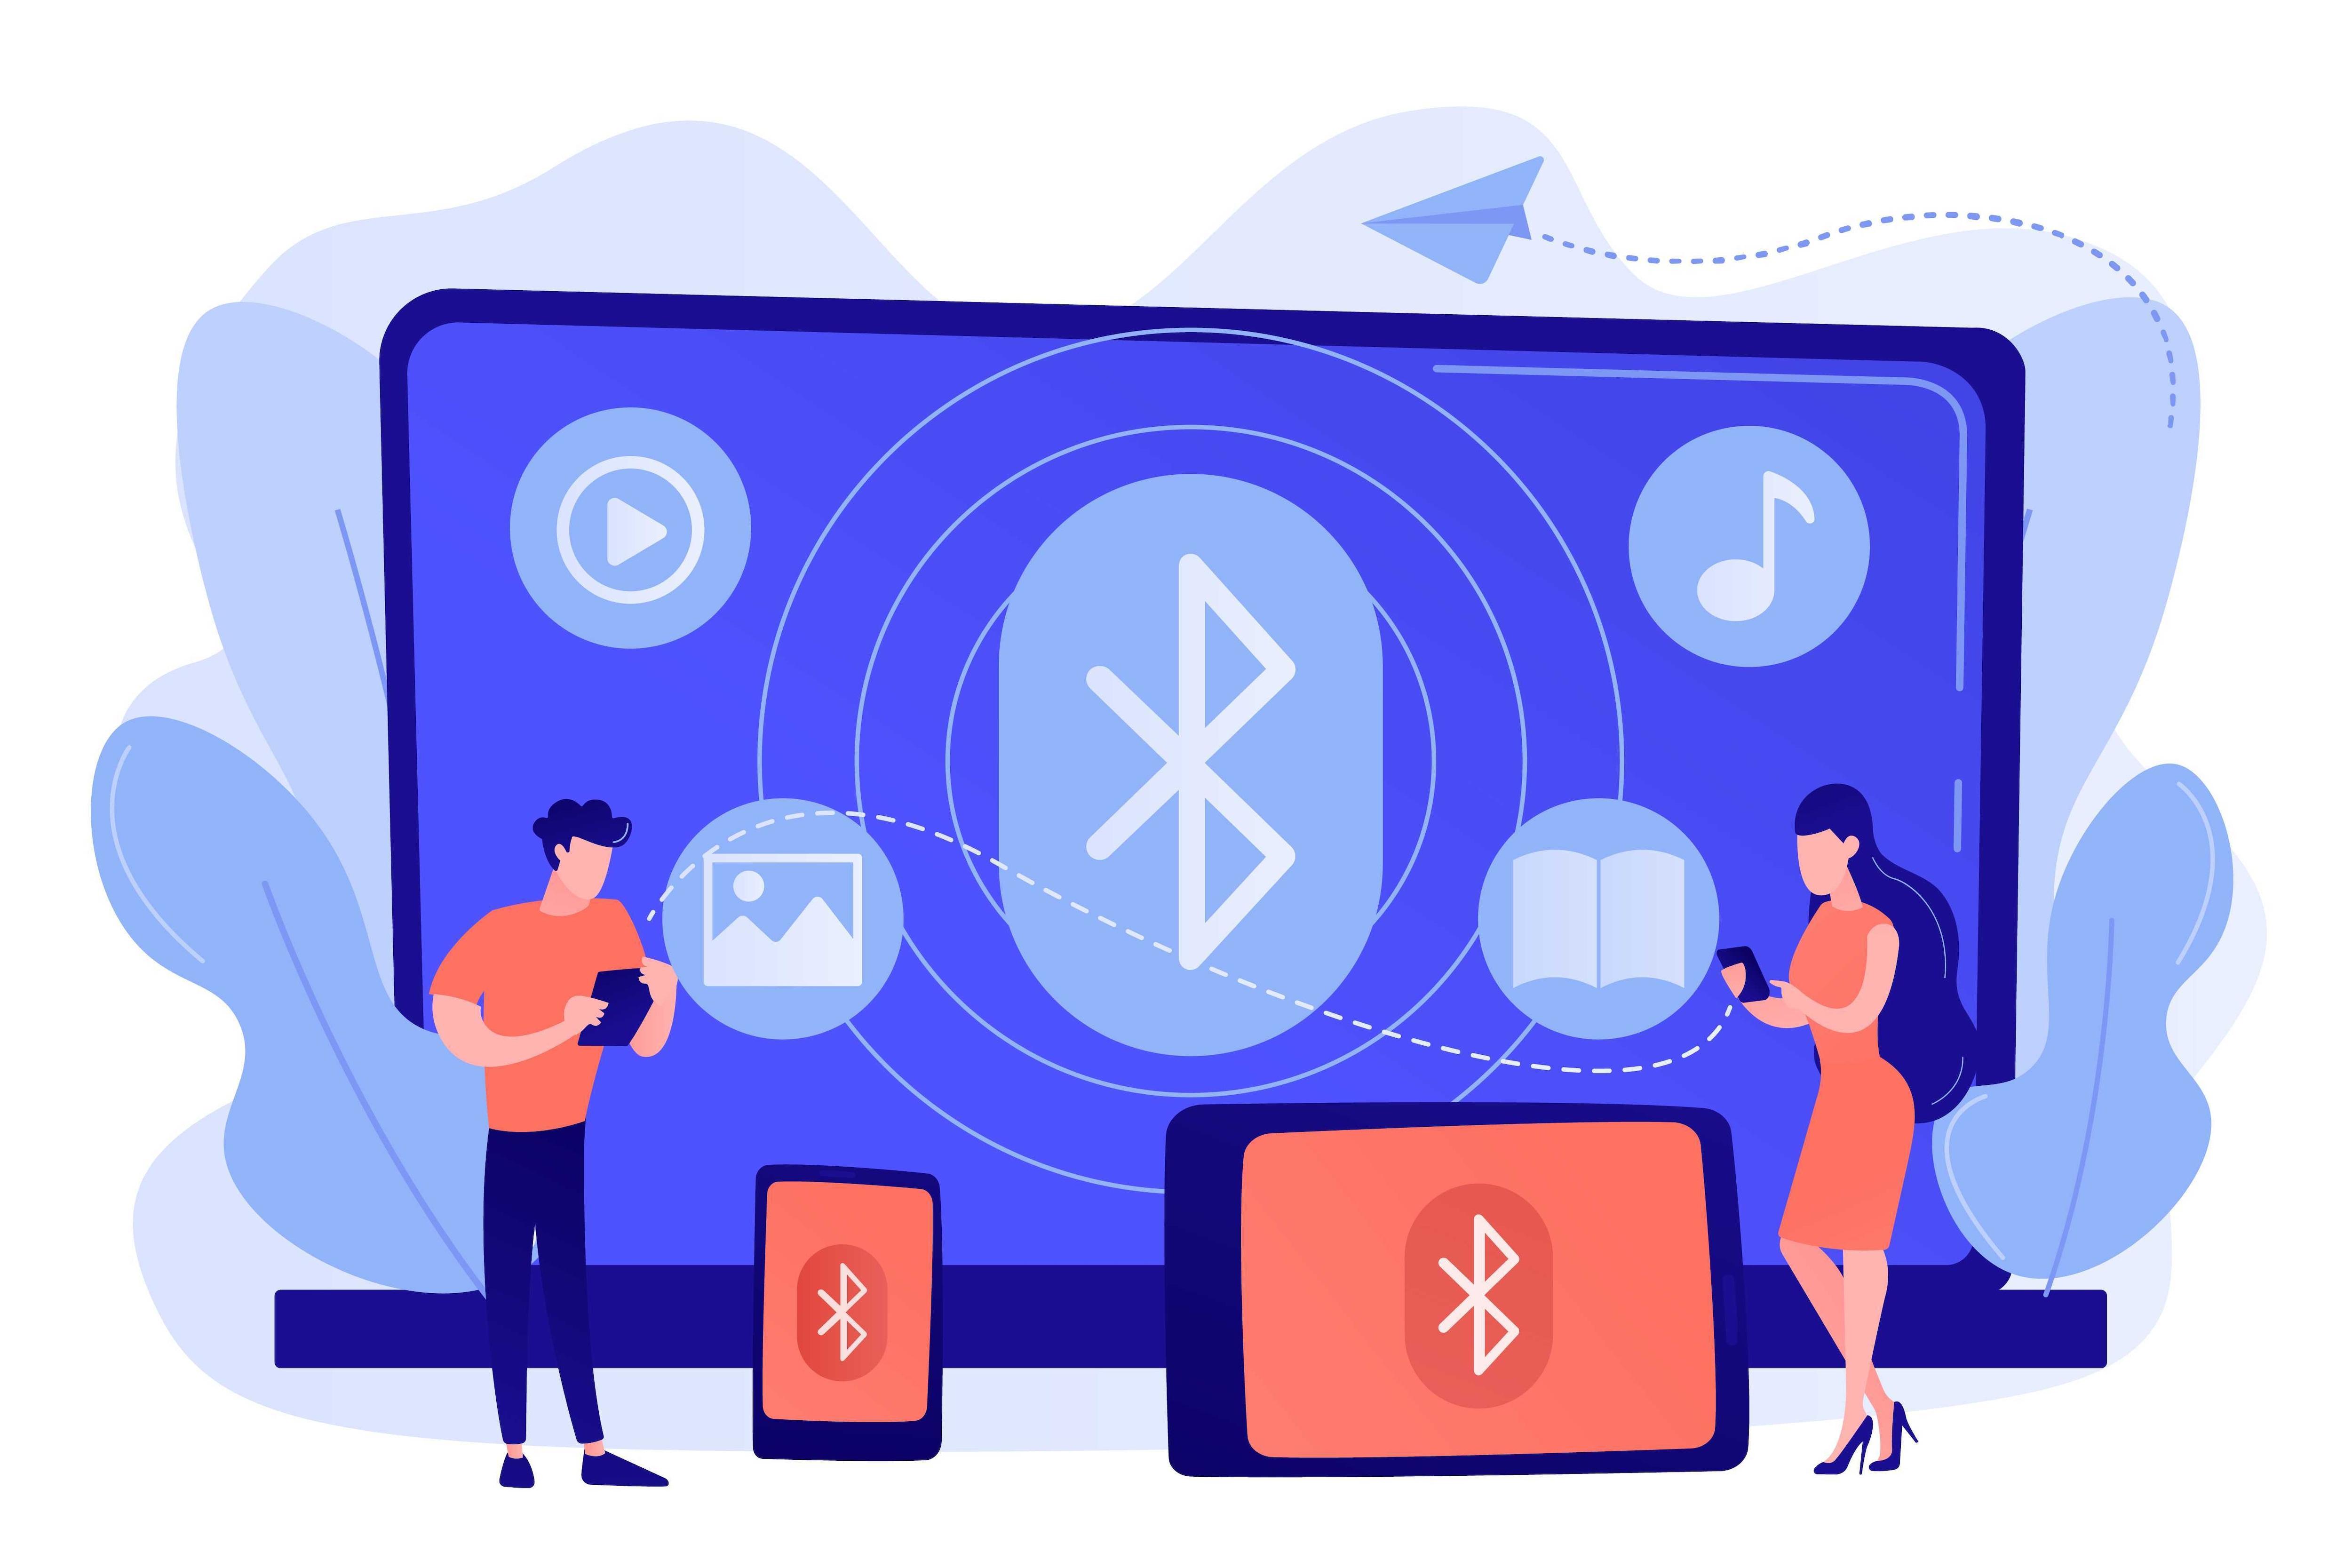 using bluetooth devices graphic concept